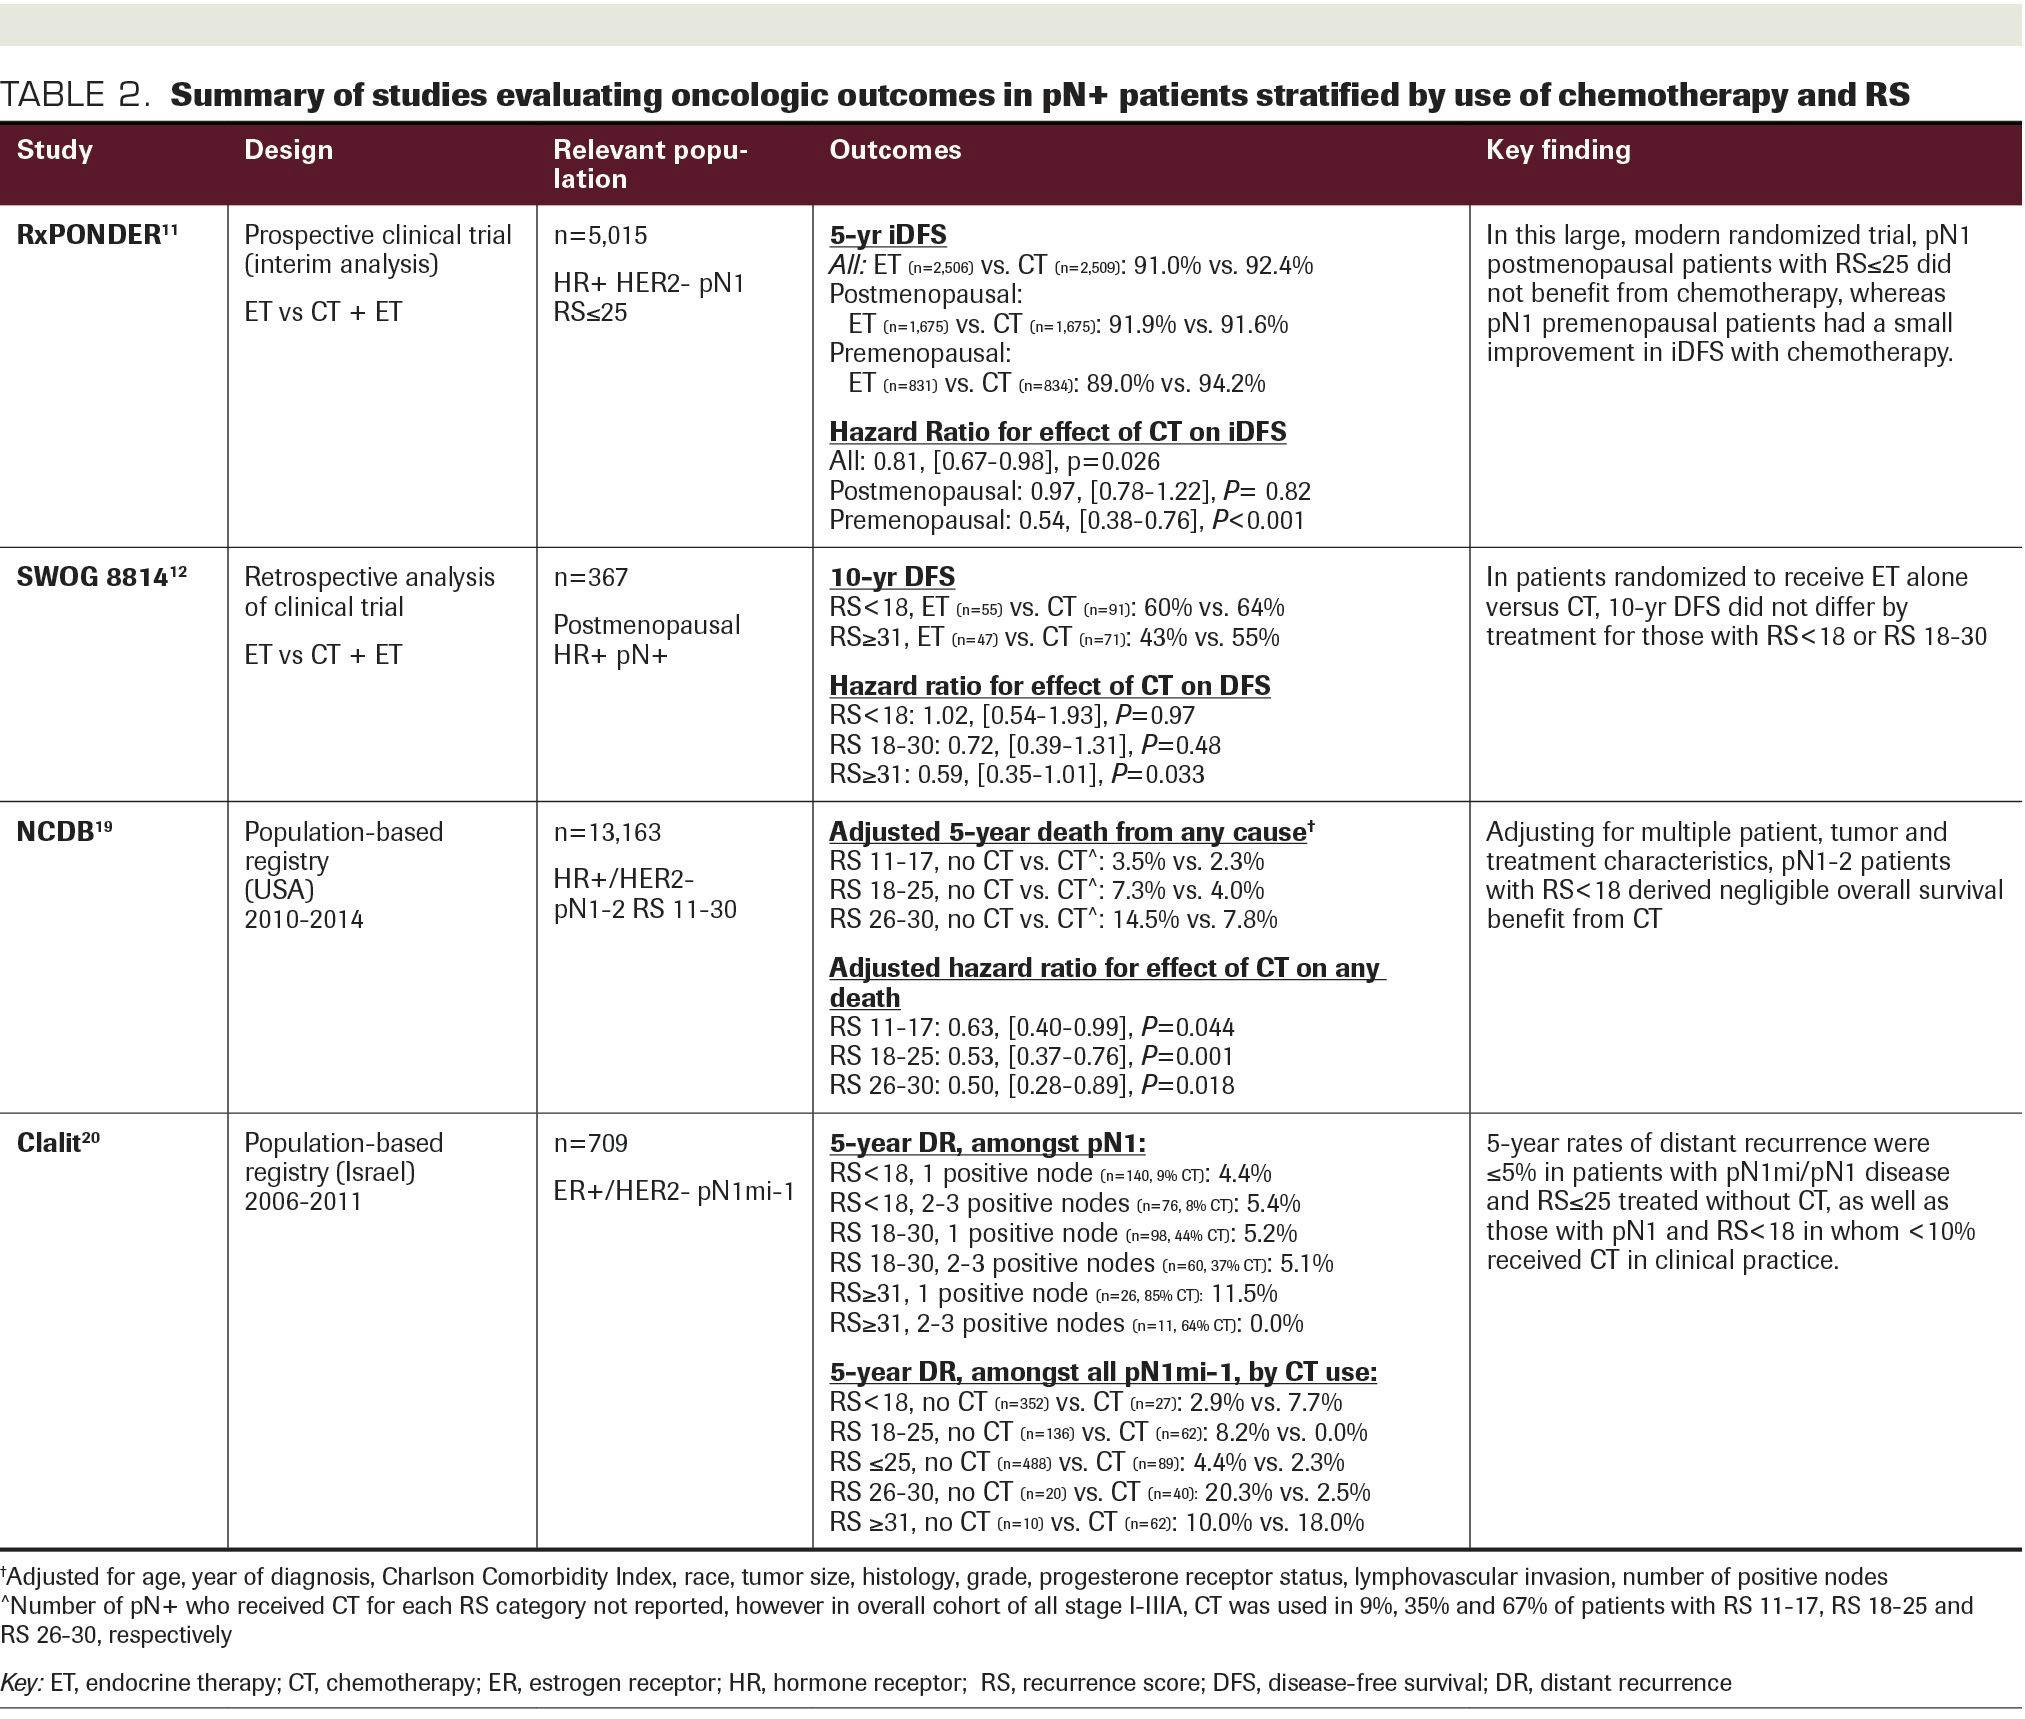 TABLE 2. Summary of studies evaluating oncologic outcomes in pN+ patients stratified by use of chemotherapy and RS.